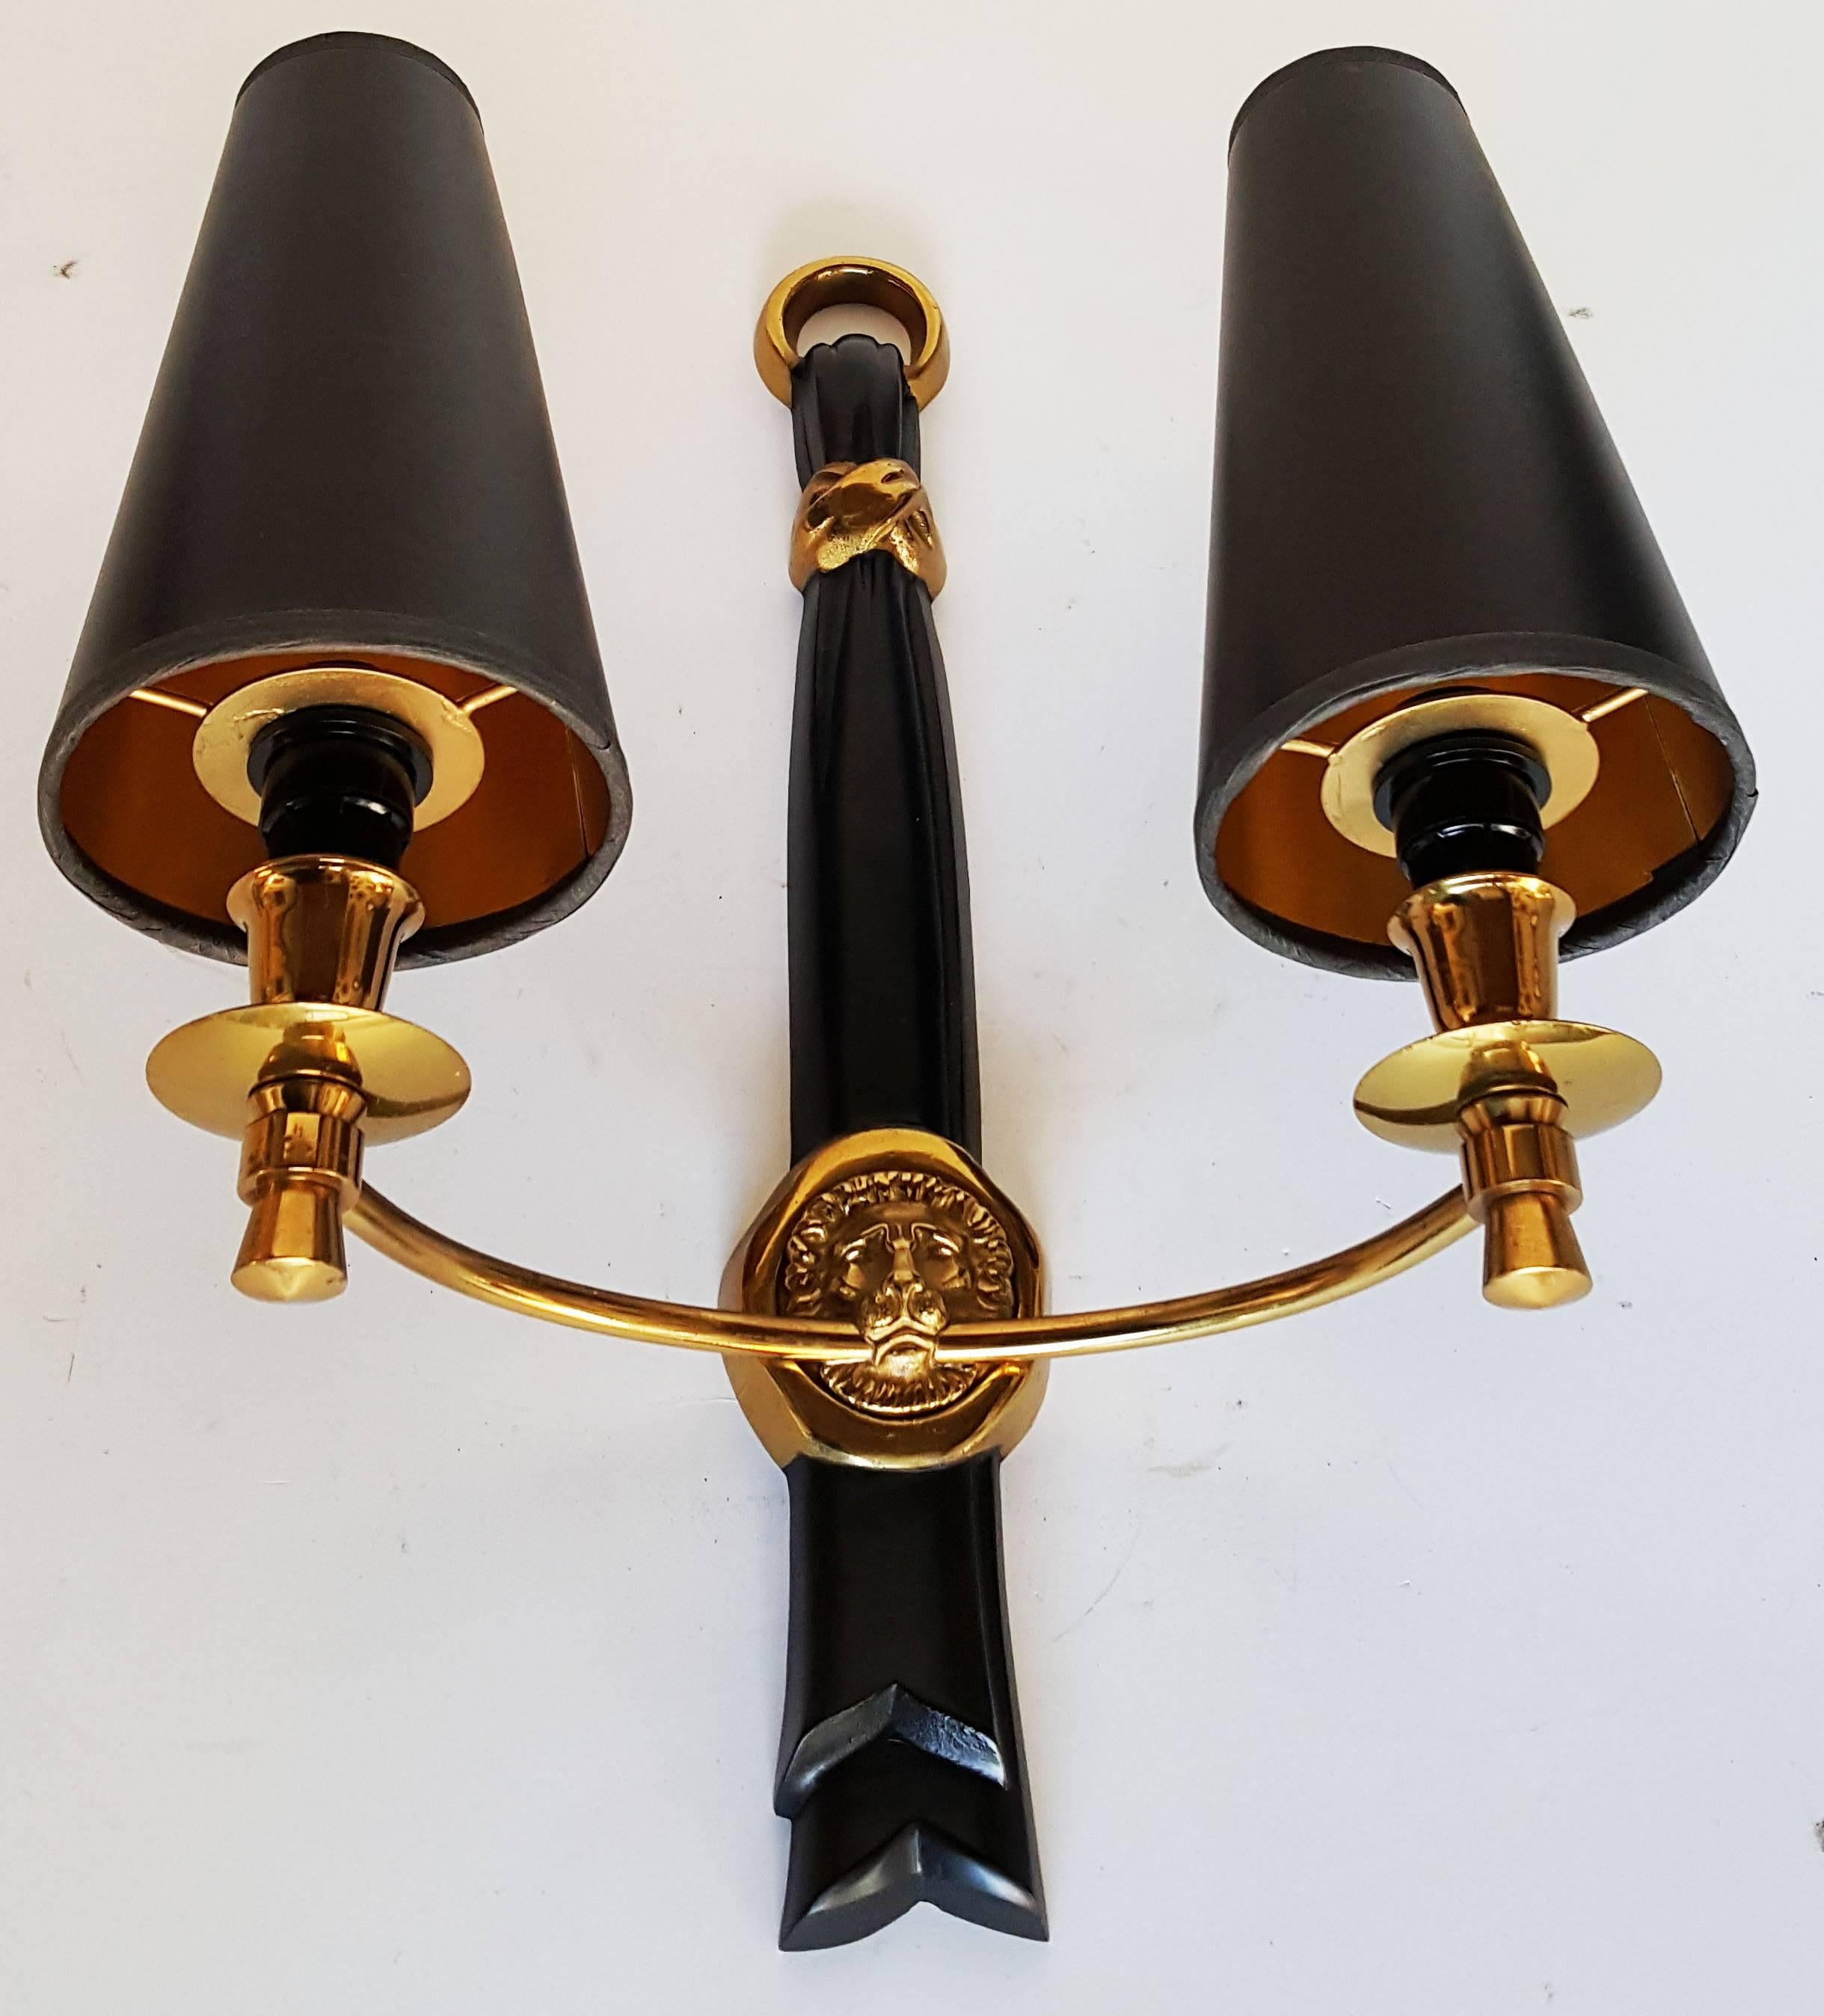 Superb pair of bronze sconces by Andre Arbus.
Two patina, black and brass.
US rewired and in working condition.
Two lights per sconce, 75 watts max per bulb.
2 pairs available priced by Pair